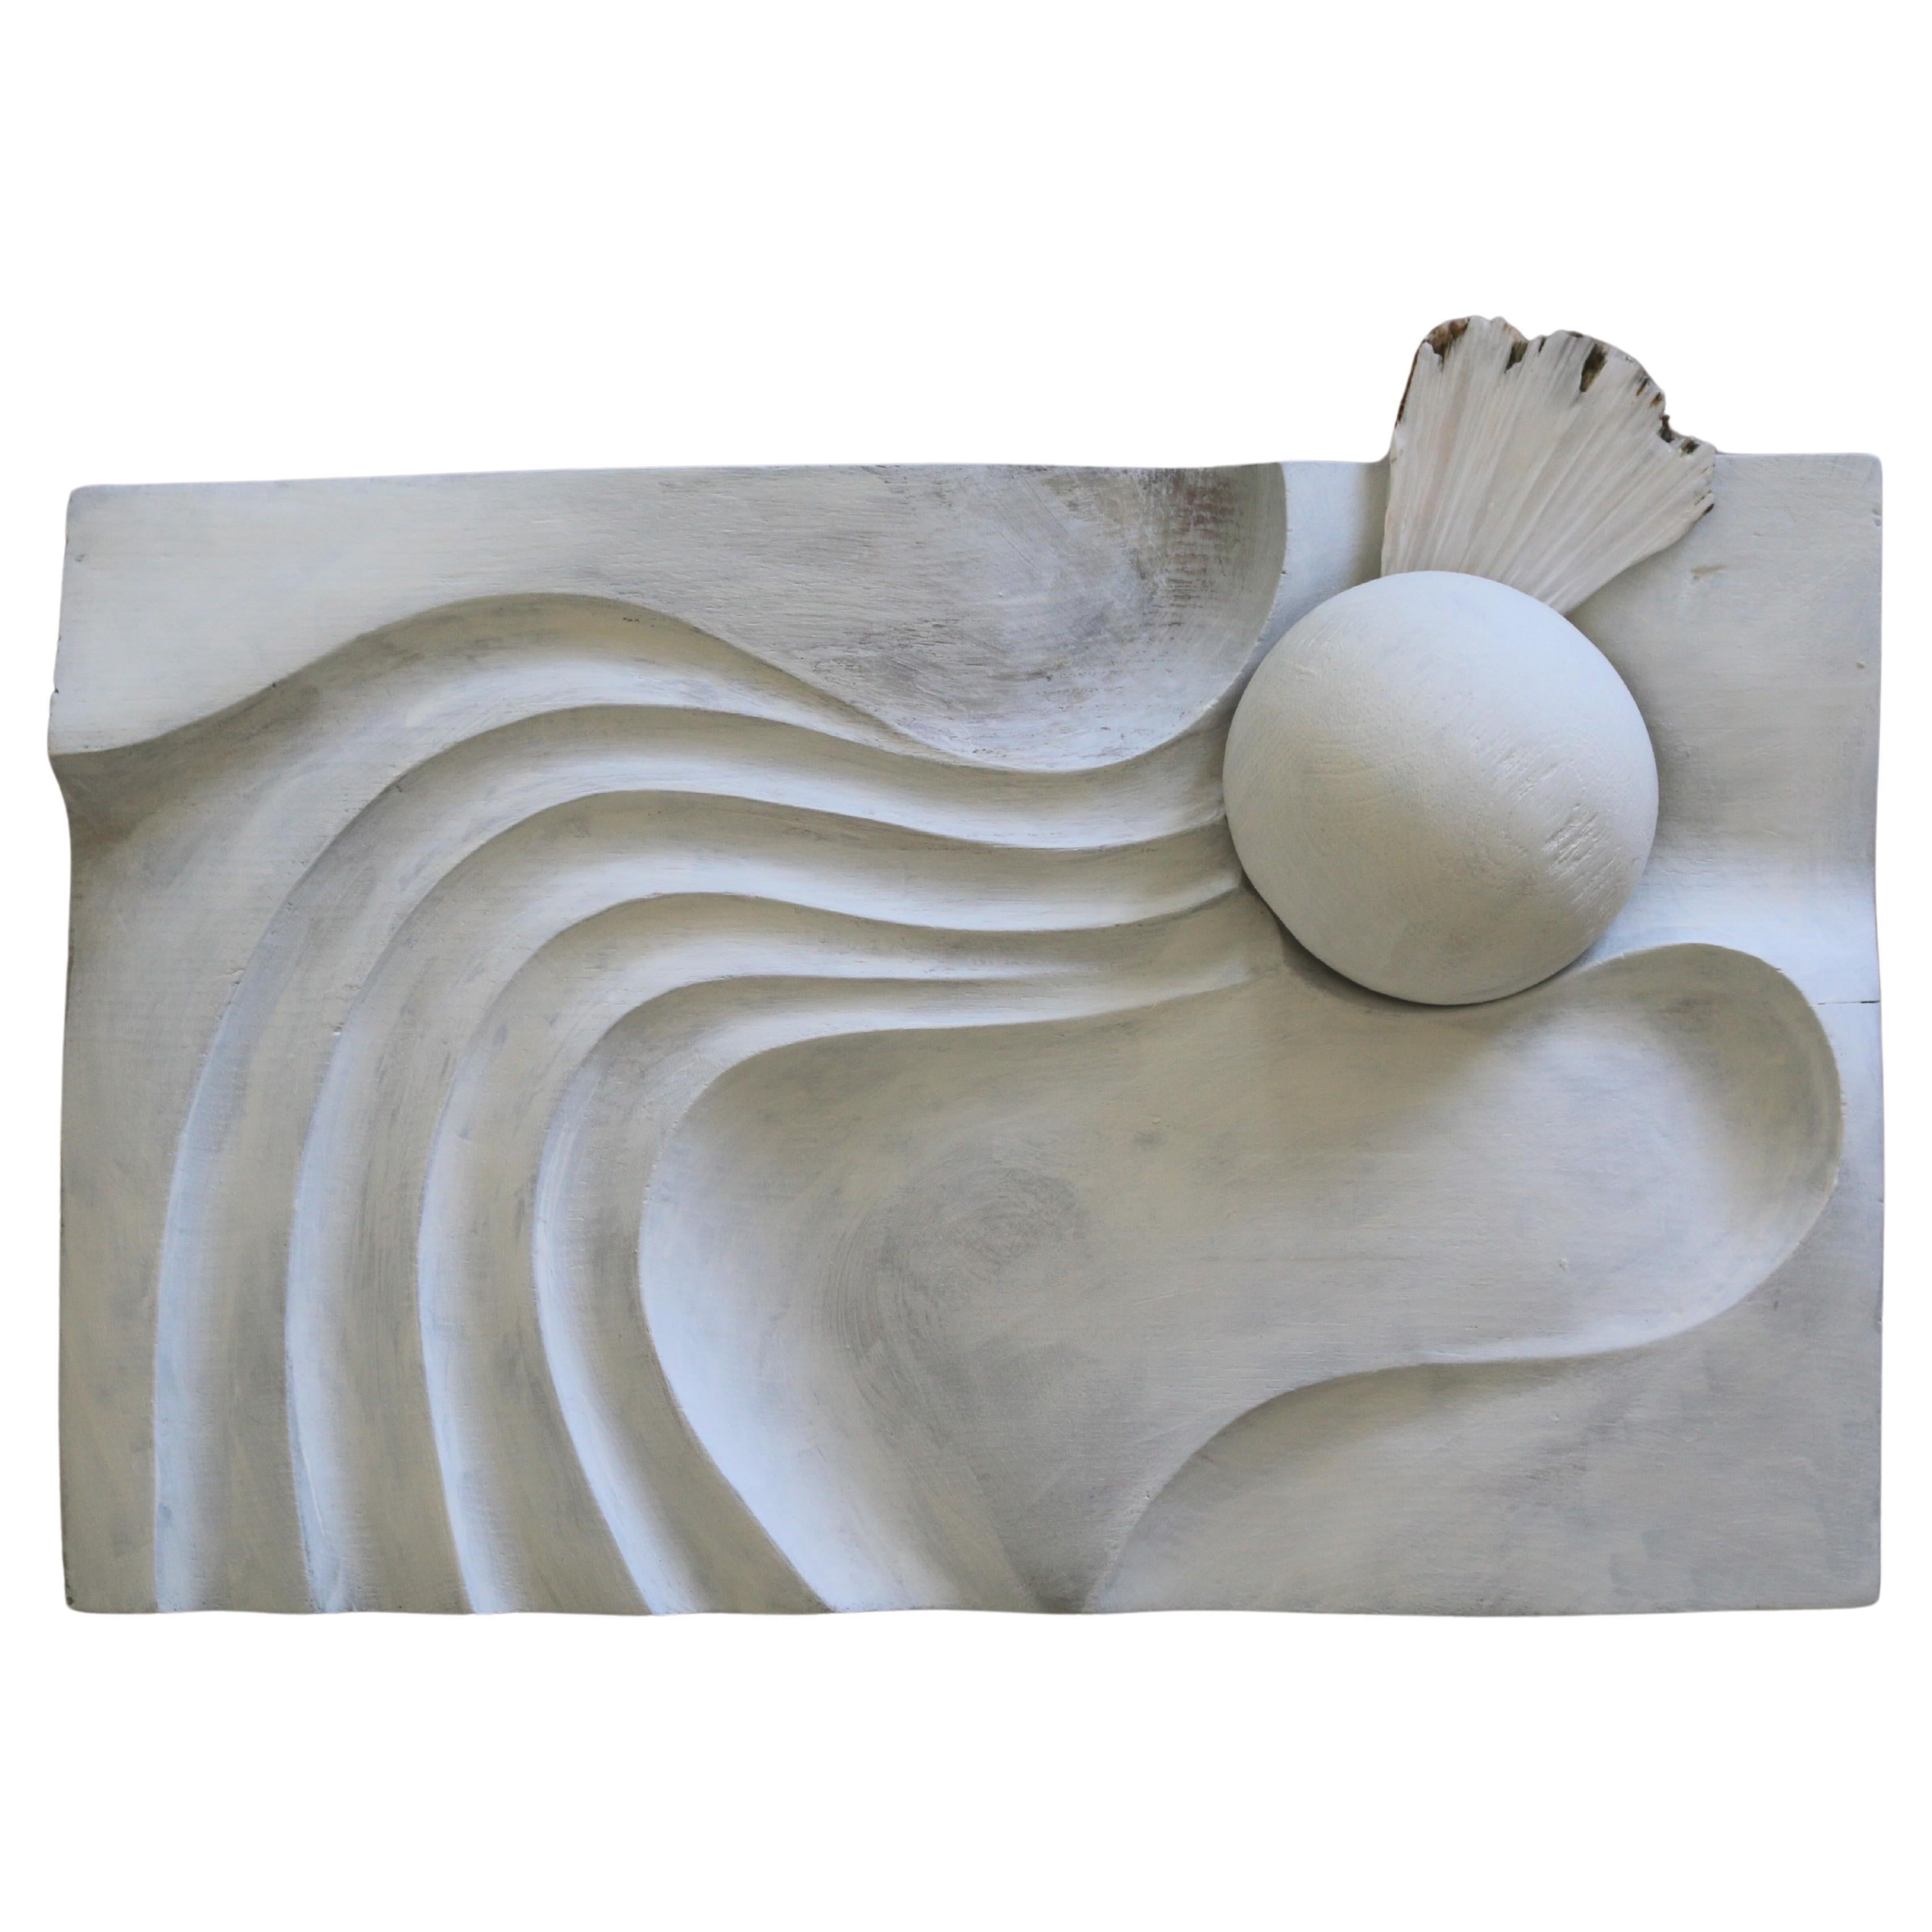 RE:04 White wood sculptural collage wall art